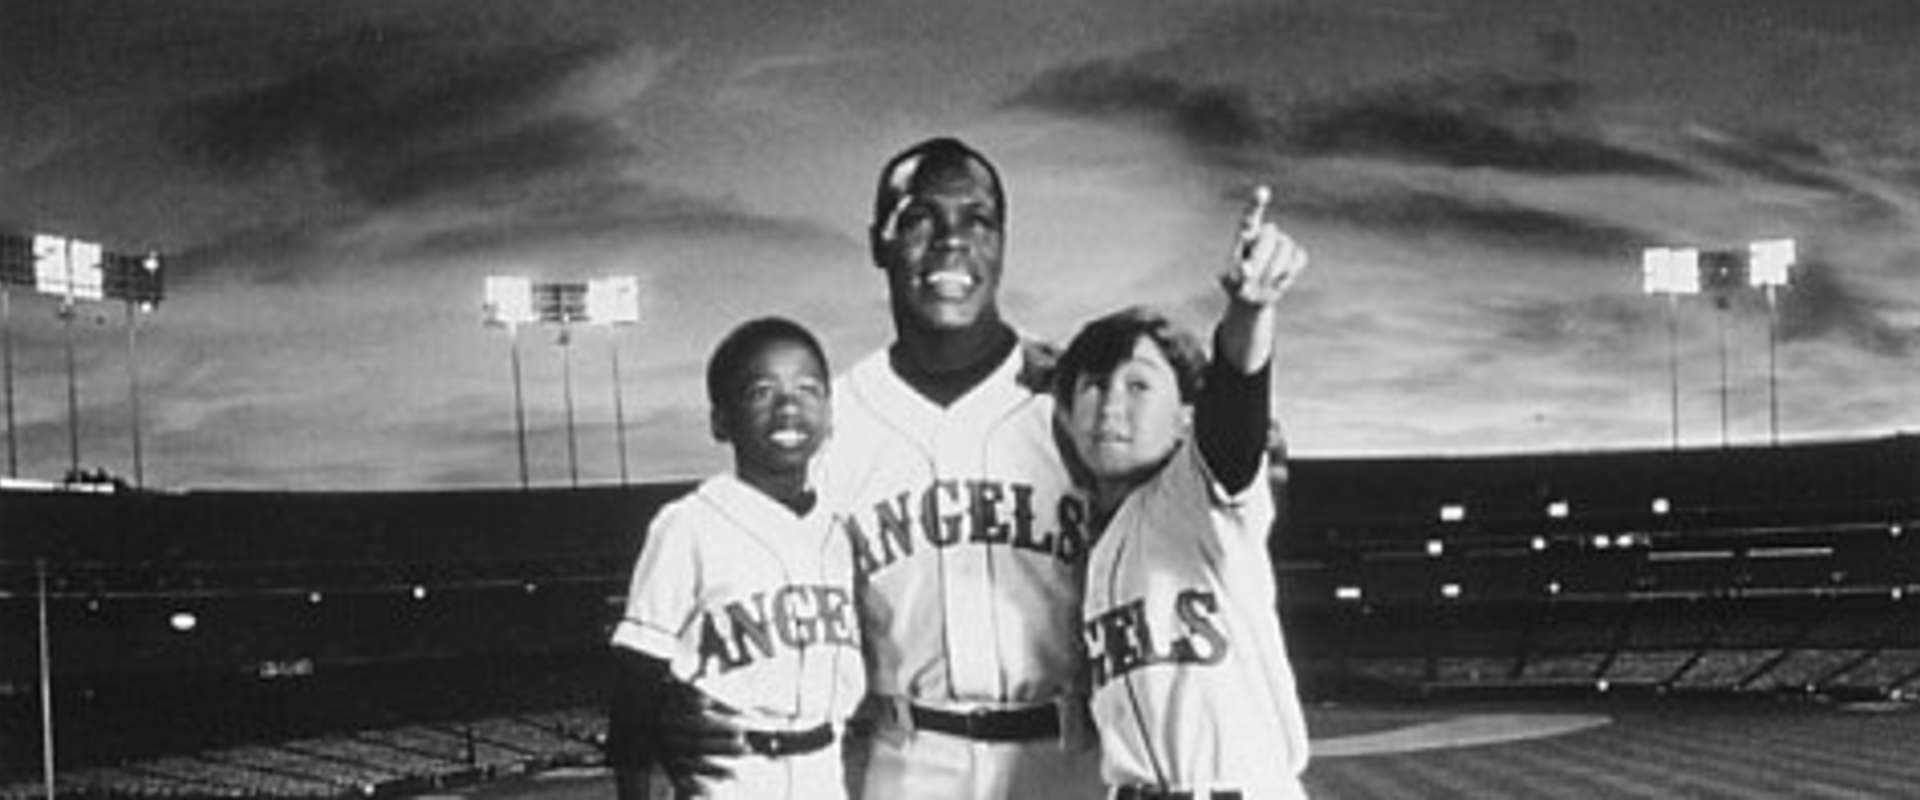 Angels in the Outfield background 1